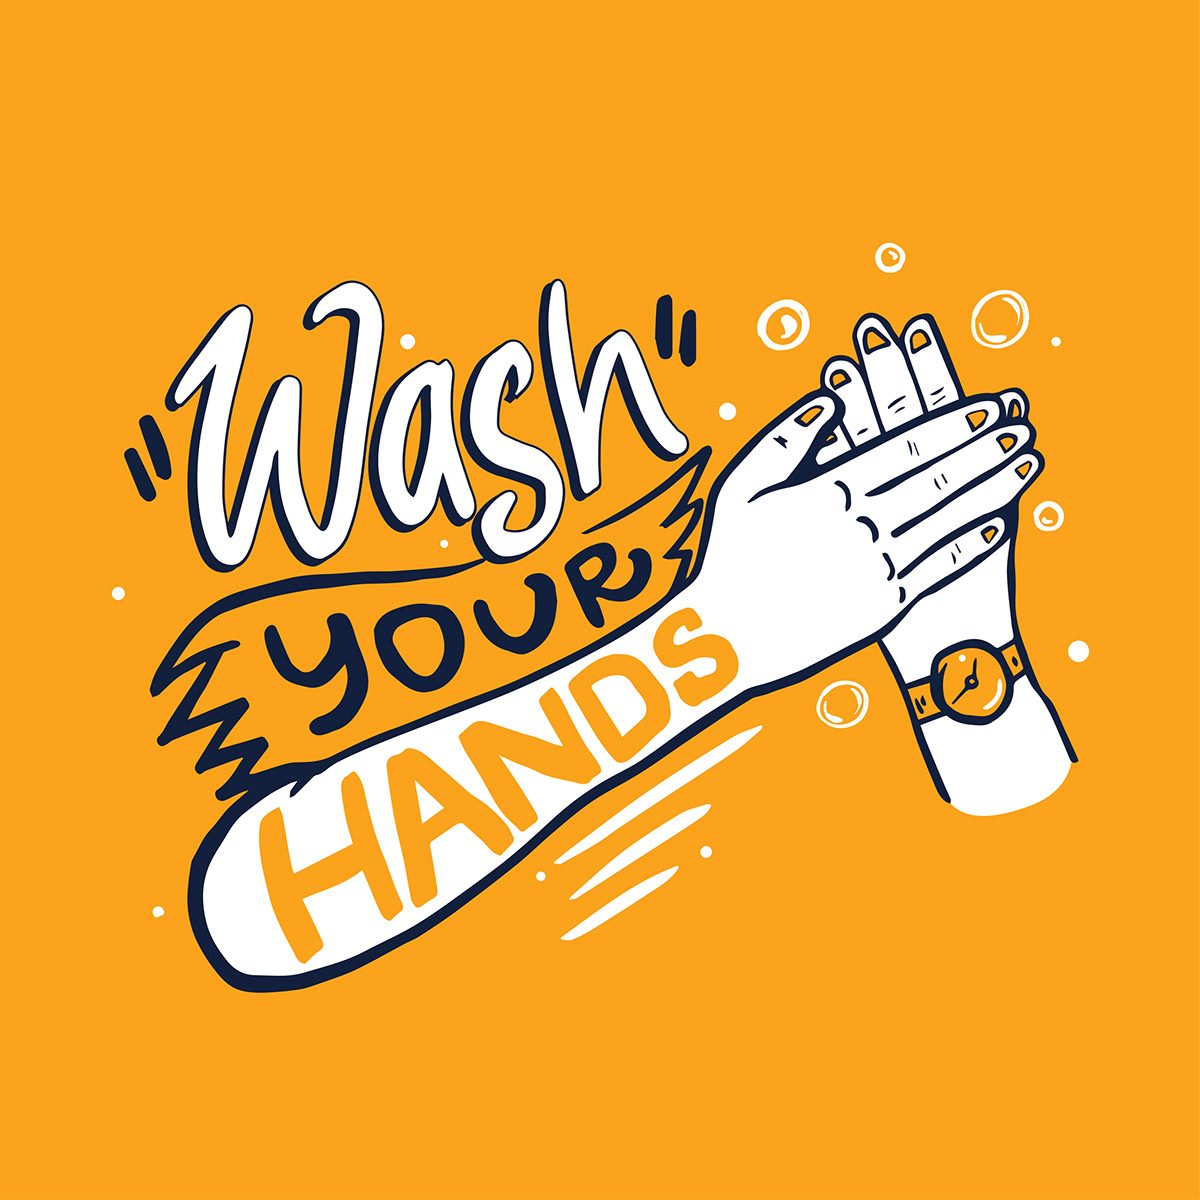 wash your hands lettering vector stay safe keep clean calligraphy typography download templates